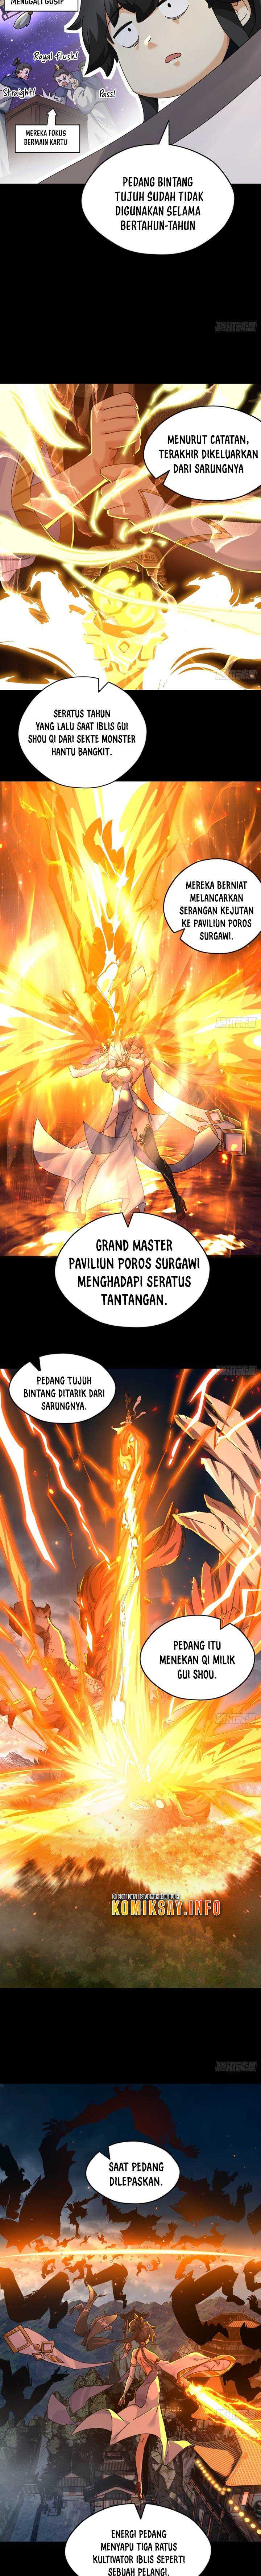 Please Slay the Demon! Young Master! Chapter 10